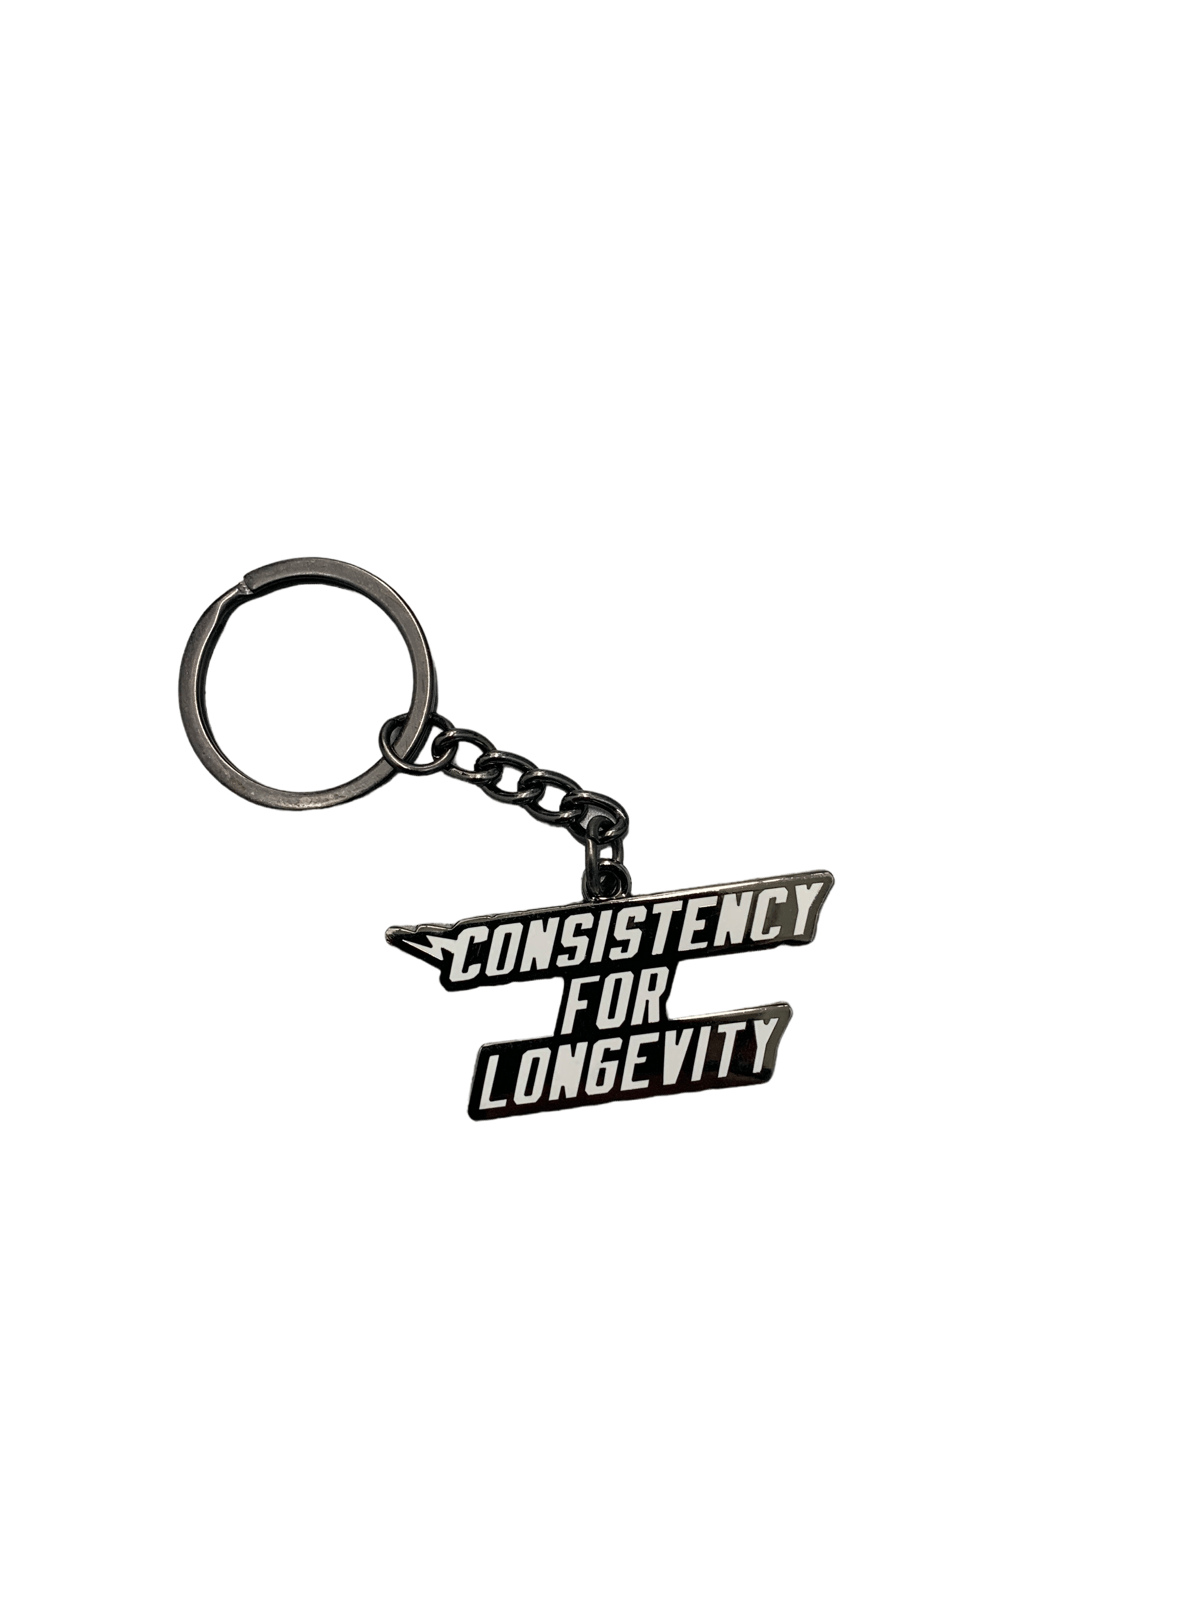 Image of Consistency For Longevity keychain 